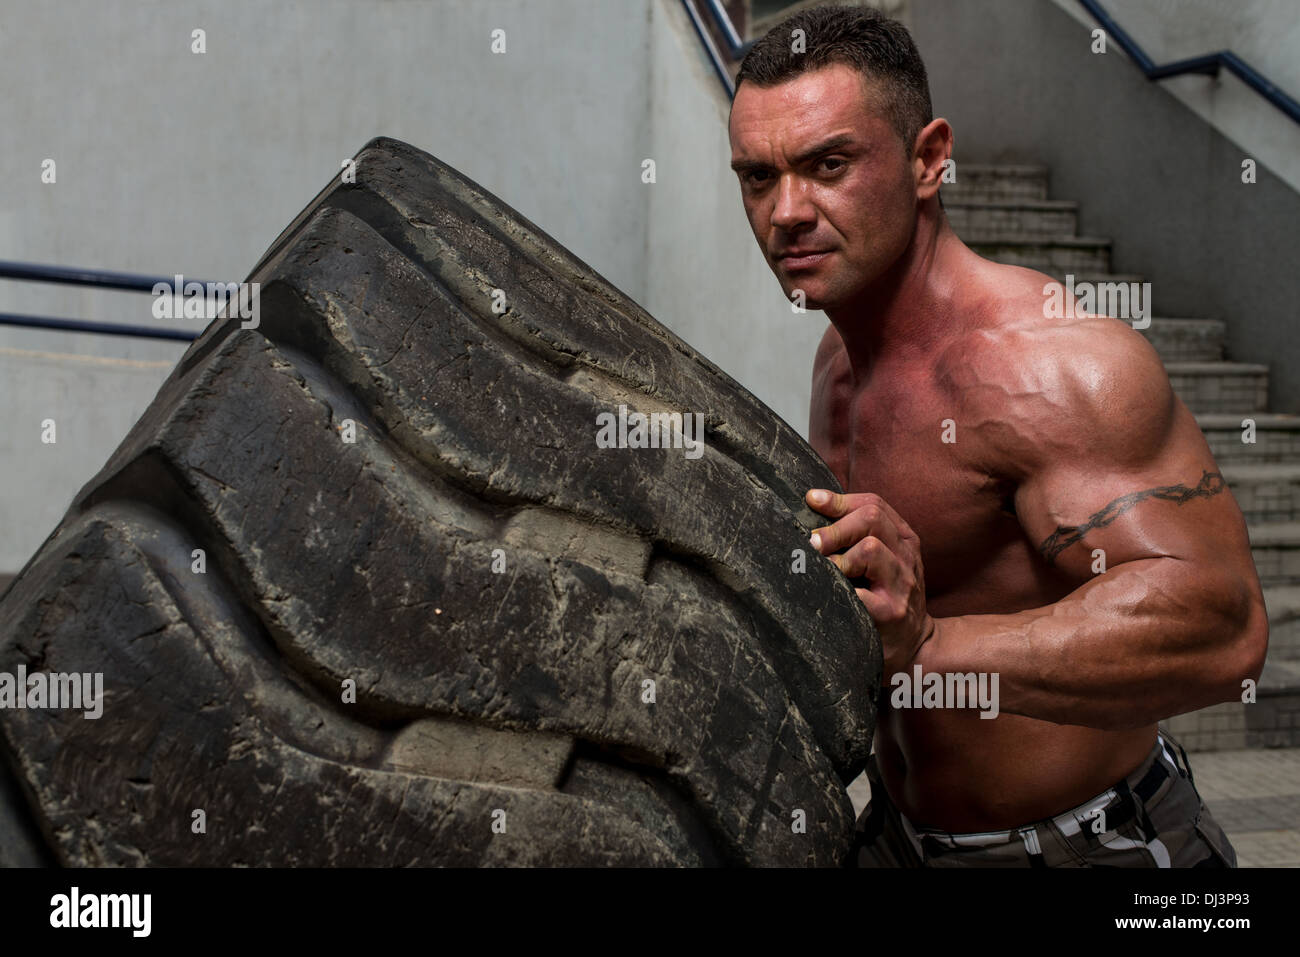 A muscular man participating in a cross fit workout by doing a tire flip Stock Photo